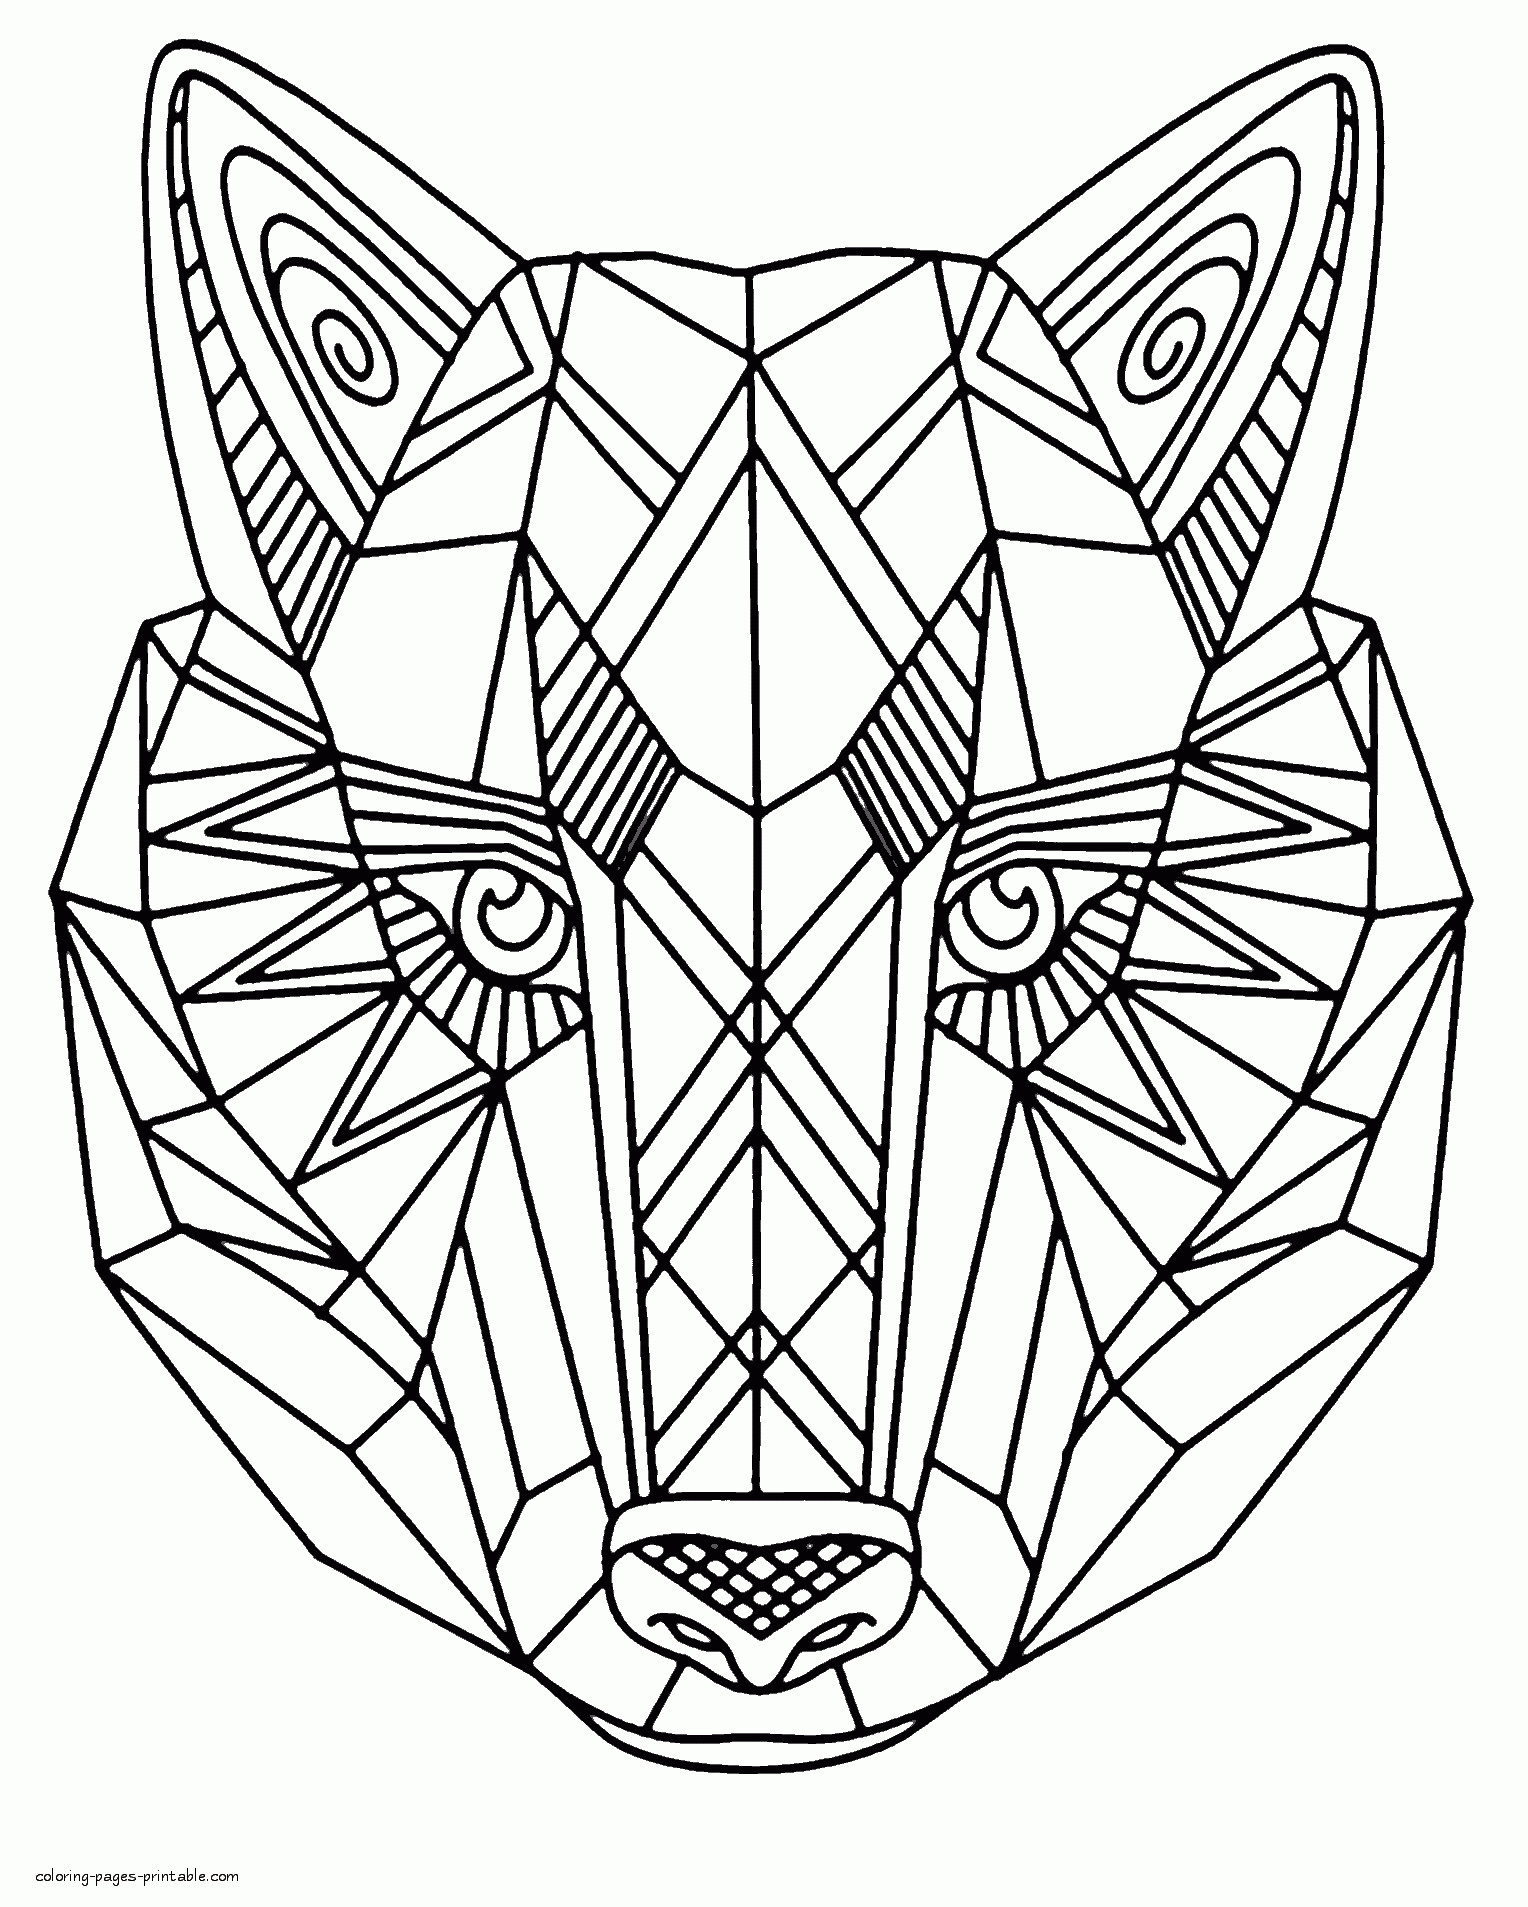 Hard Kids Coloring Pages
 Hard animal coloring pages Coloring pages for kids